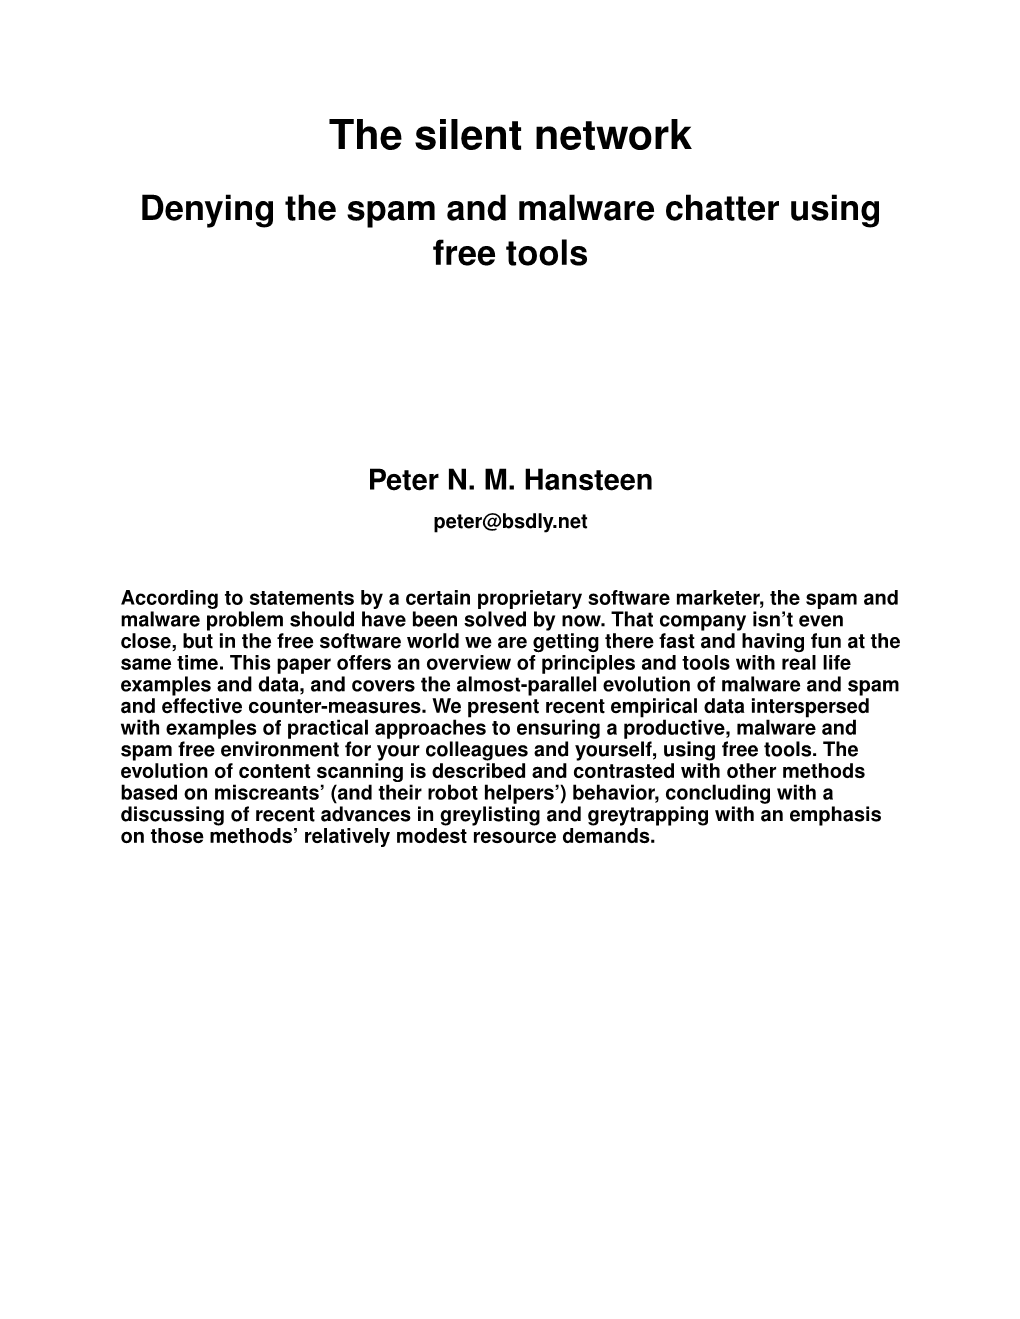 The Silent Network: Denying the Spam and Malware Chatter